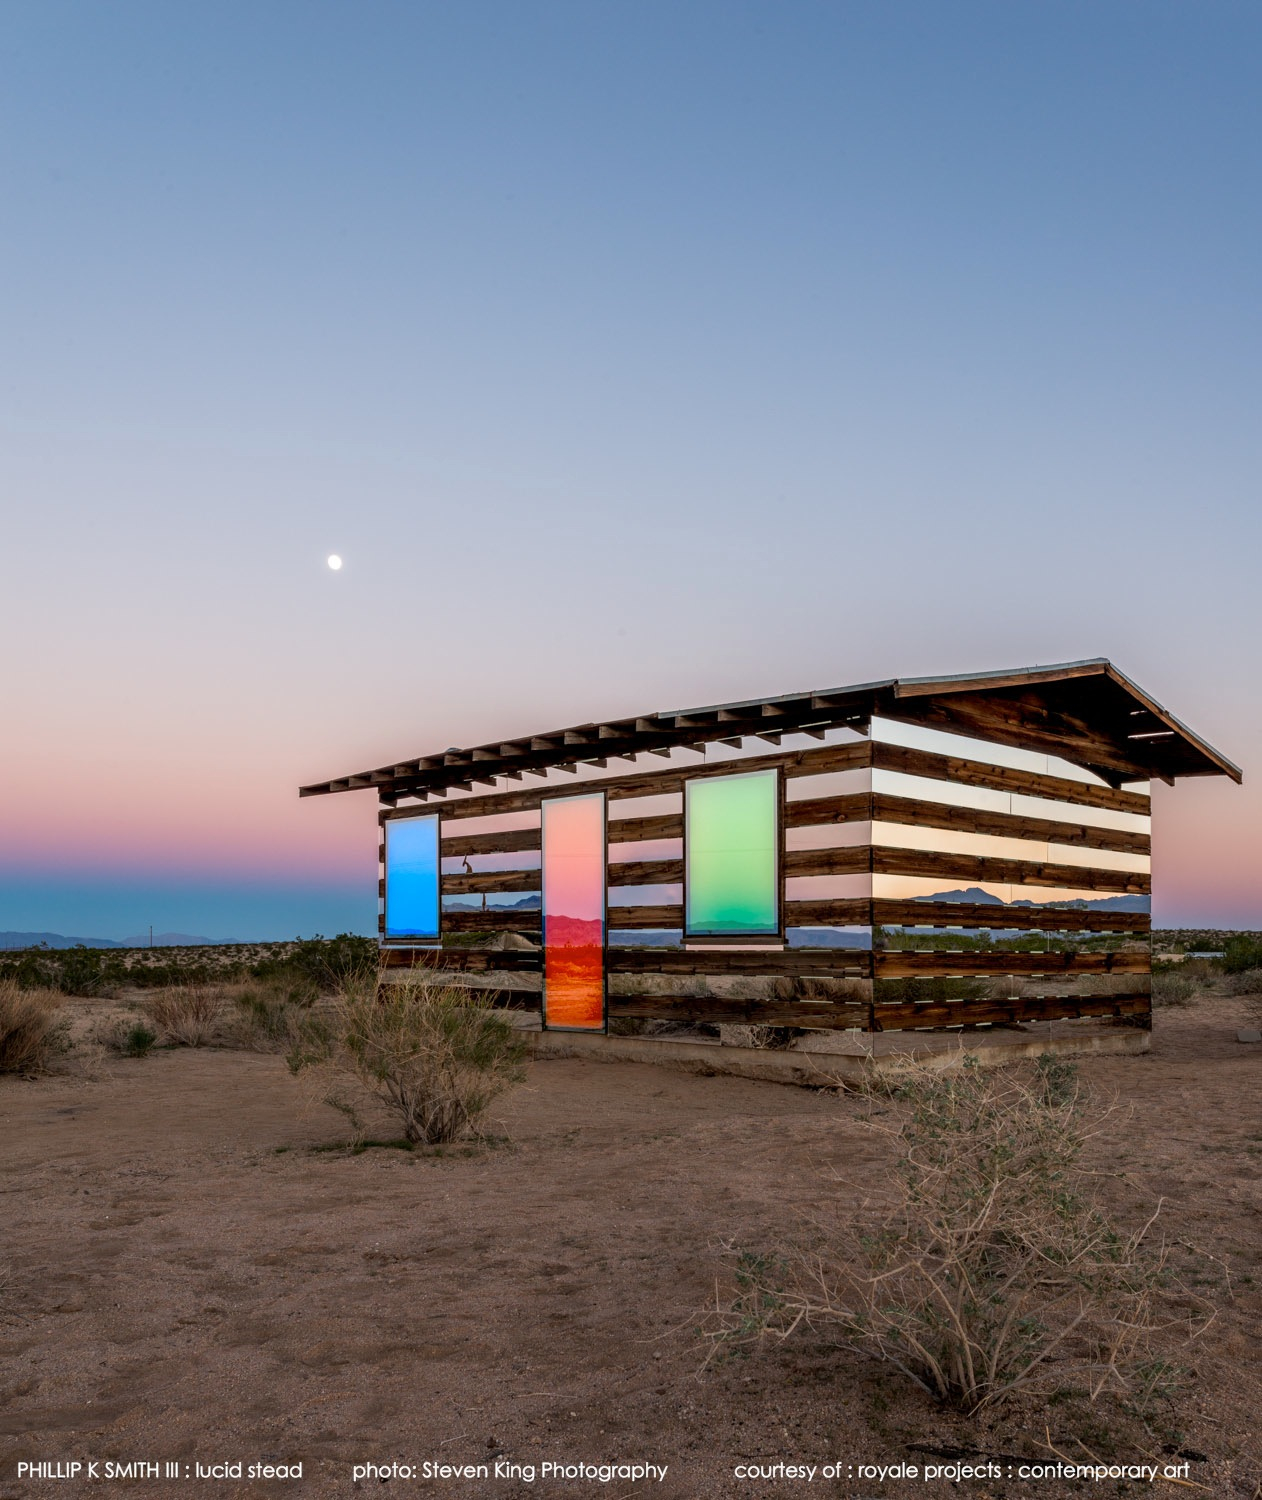 Lucid Stead by Phillip K. Smith III in Joshua Tree, CA. Photo by Steven King Photography.